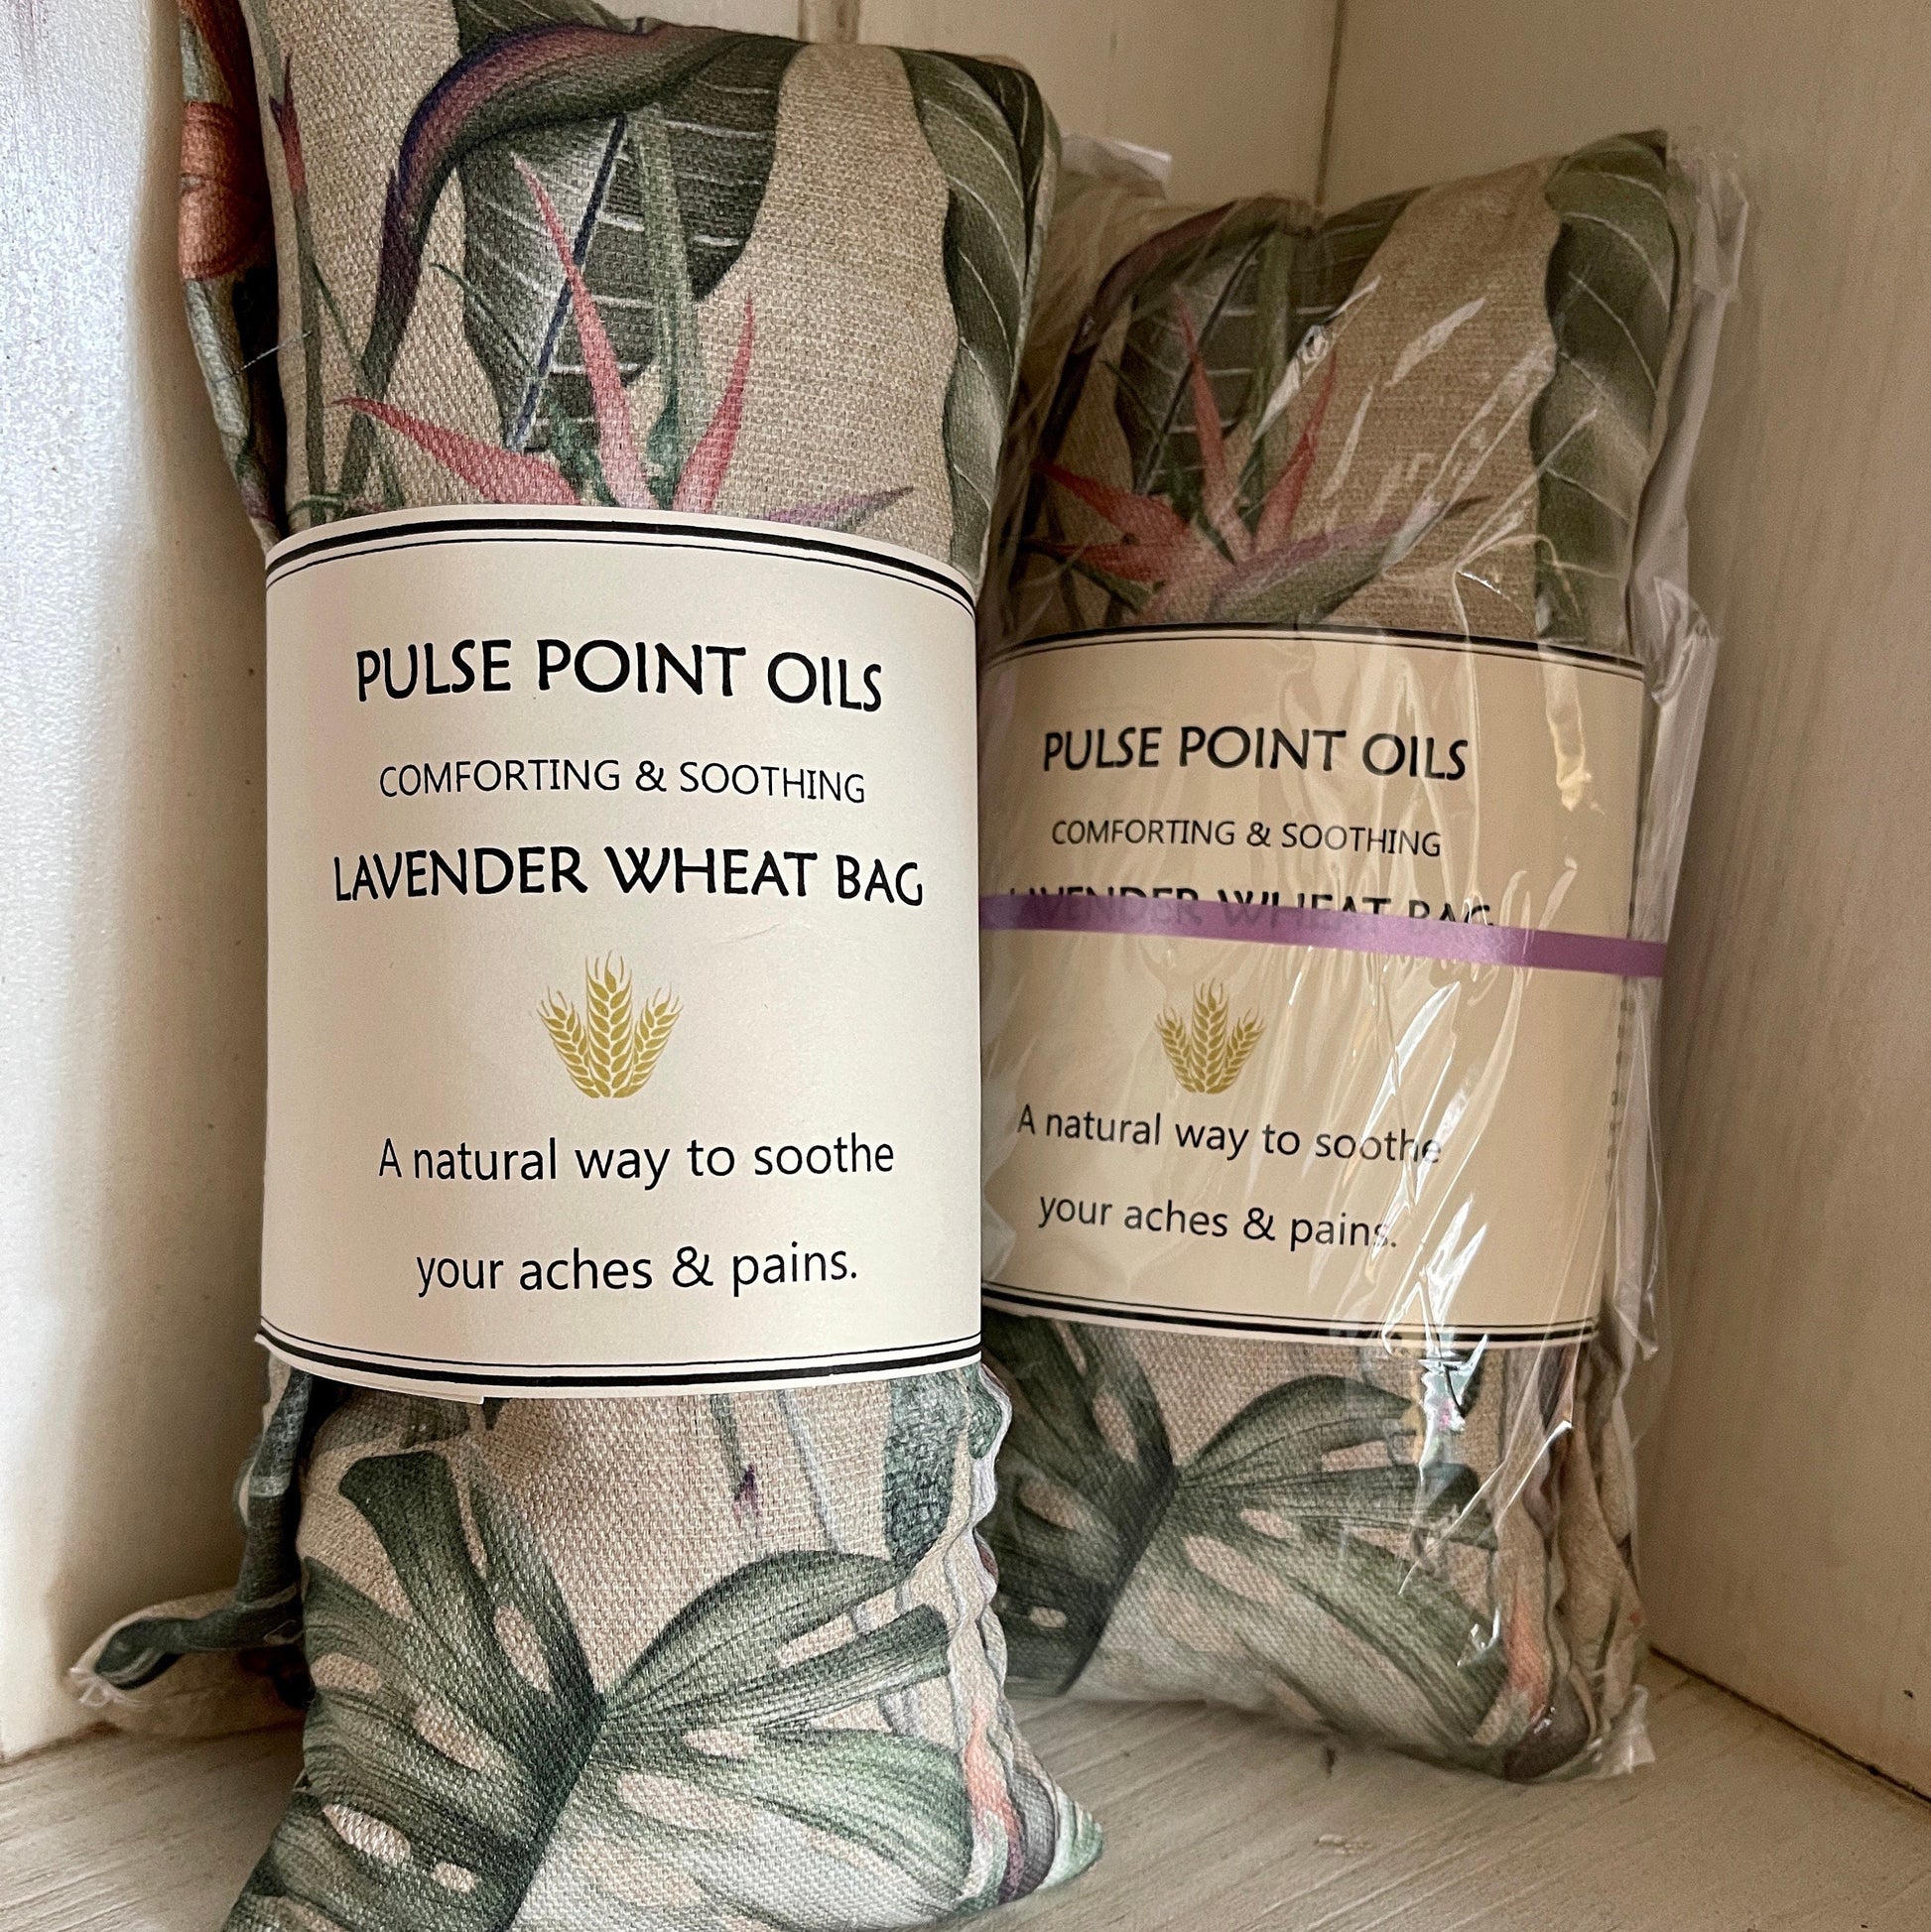 Two lavender wheat bags, wellness and wellbeing gifts in tropical paradise print